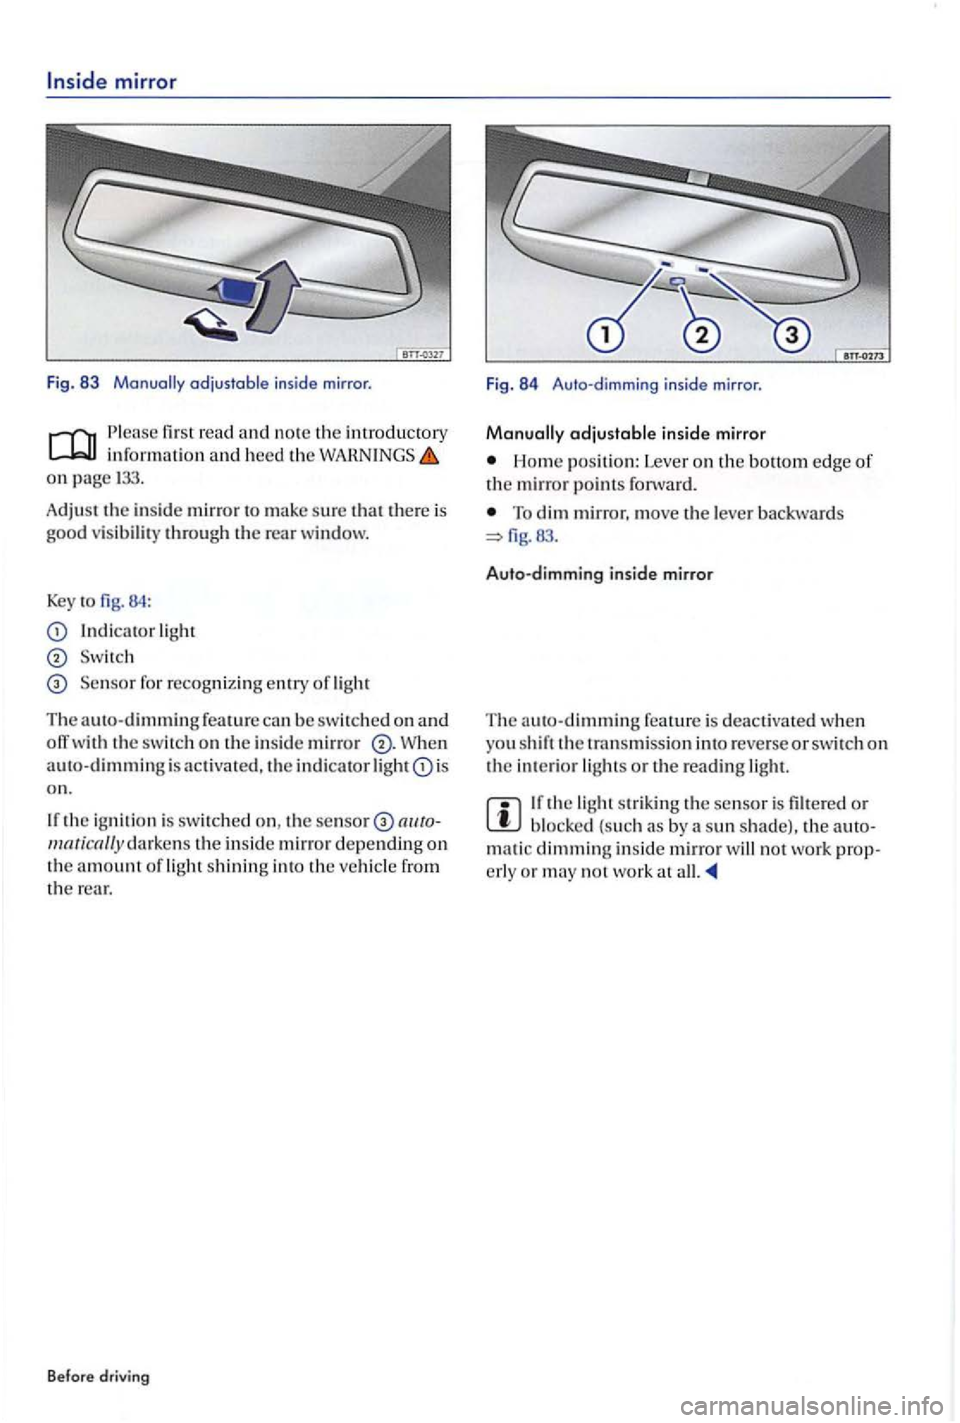 VOLKSWAGEN GOLF PLUS 2004 User Guide mirror 
Fig. 83 
read informatio n  and  heed the on page 
Adjust the  in sid e mirror to  make su re that there  is good v is ibilit y throug h  the rear window. 
Key to 84 : 
light 
Se nsor for  rec